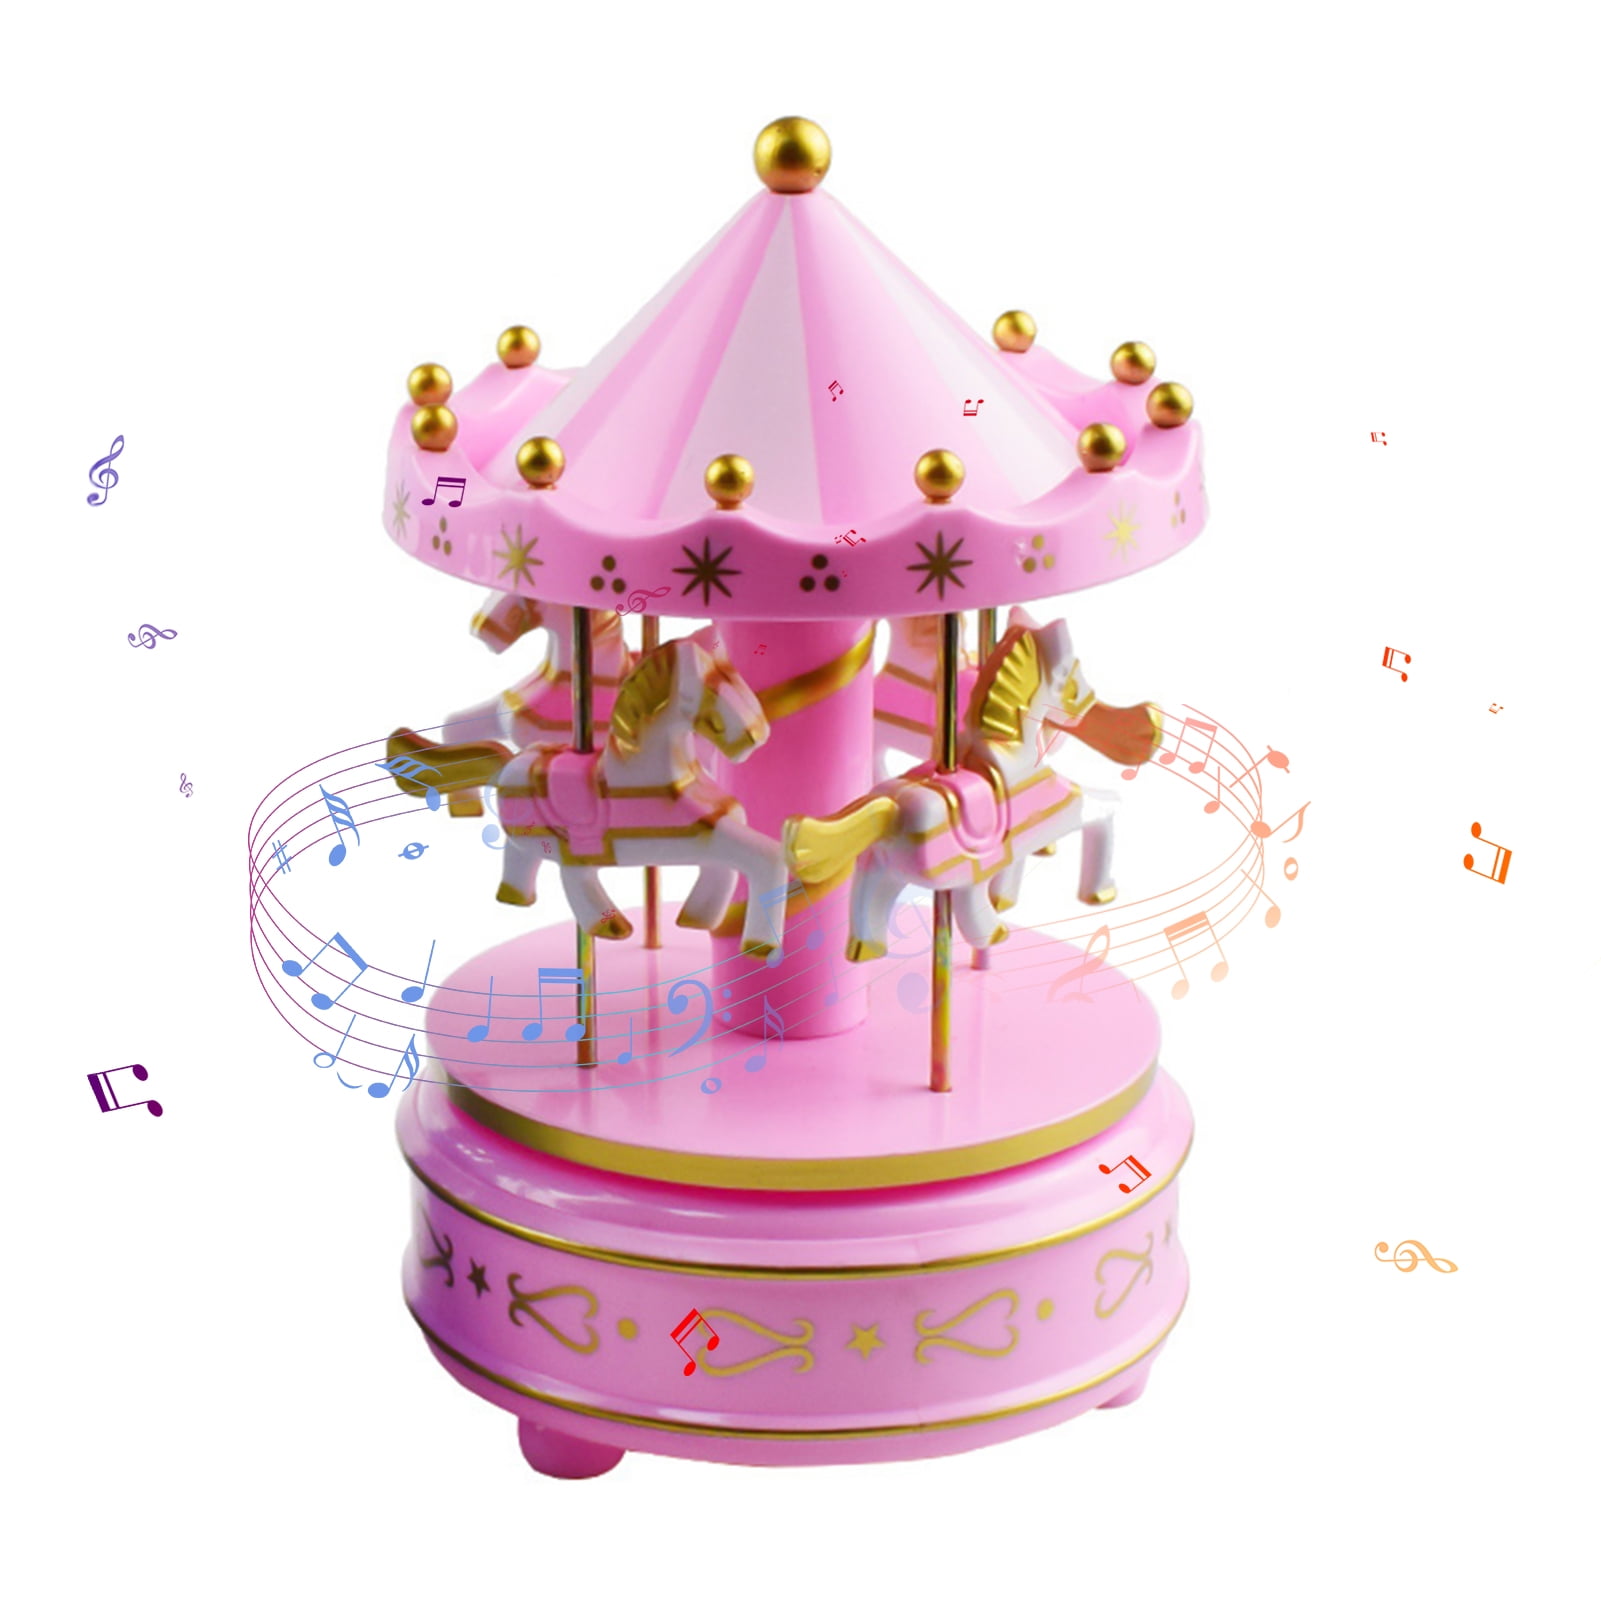 Prezents.com Christmas Themed Musical Carousel Rotating With 3 Beautiful Horses 